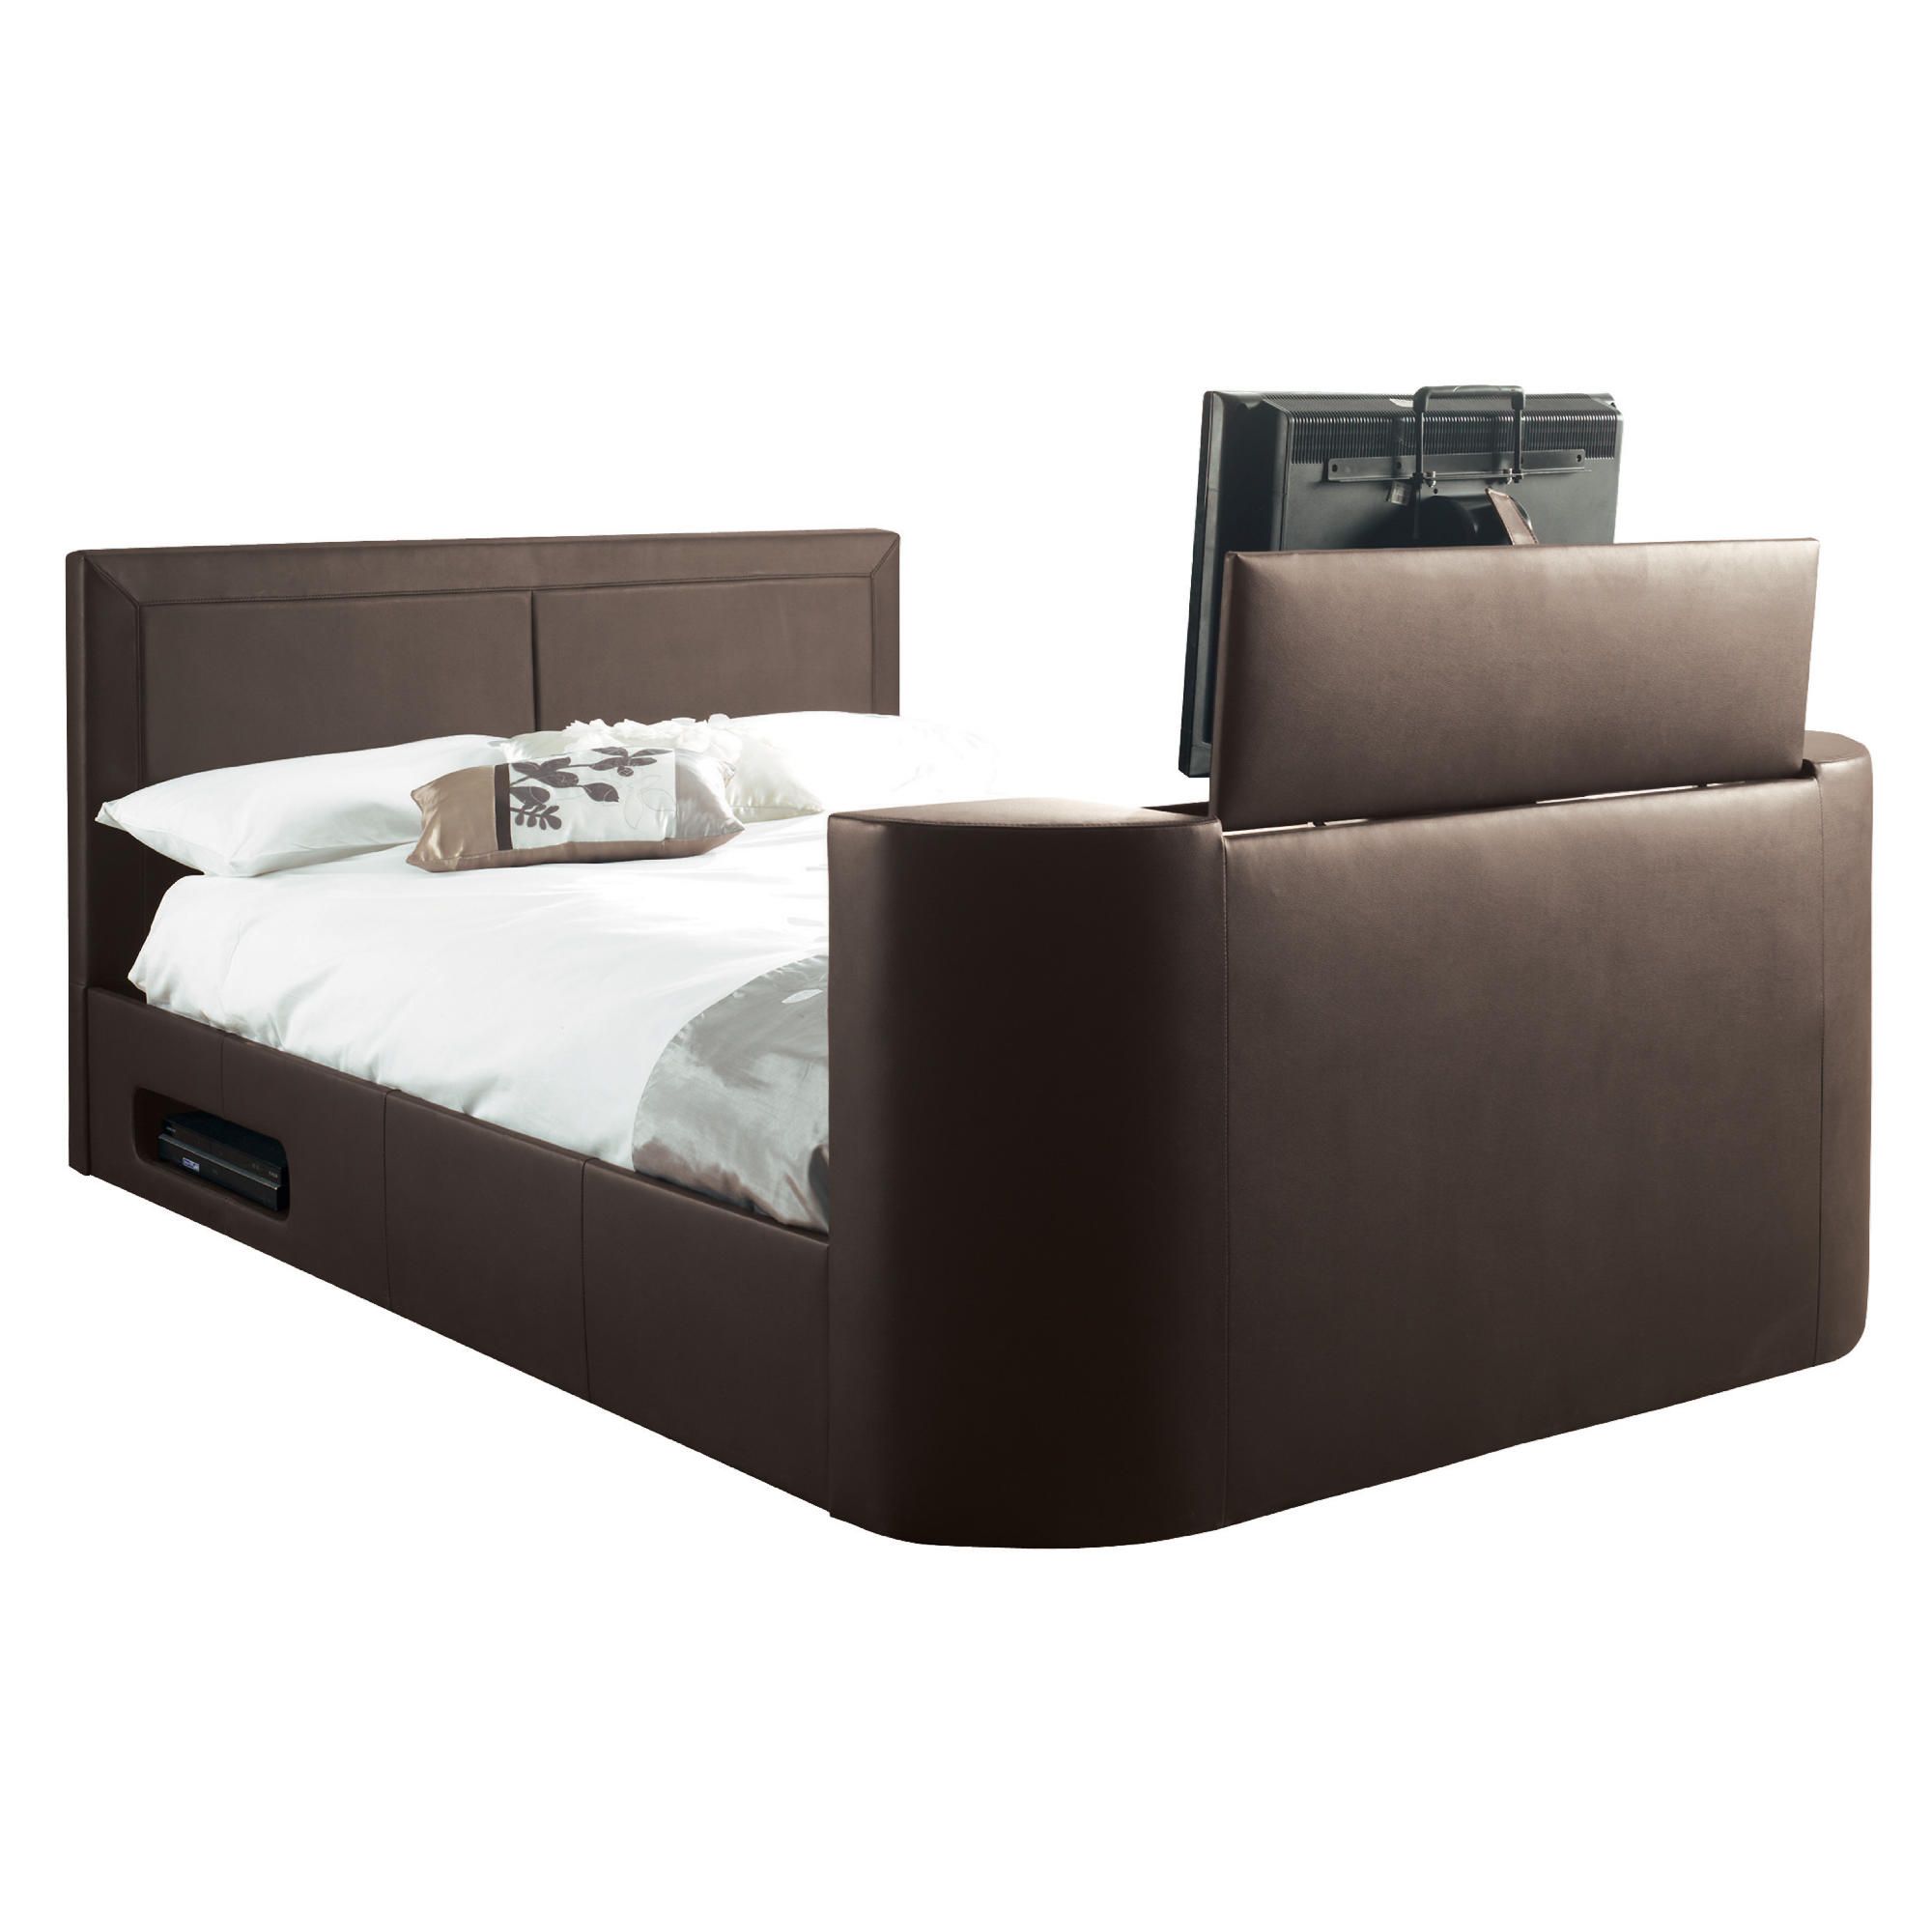 Charlotte Superking Gas Lift Tv Bed Frame, Brown at Tescos Direct